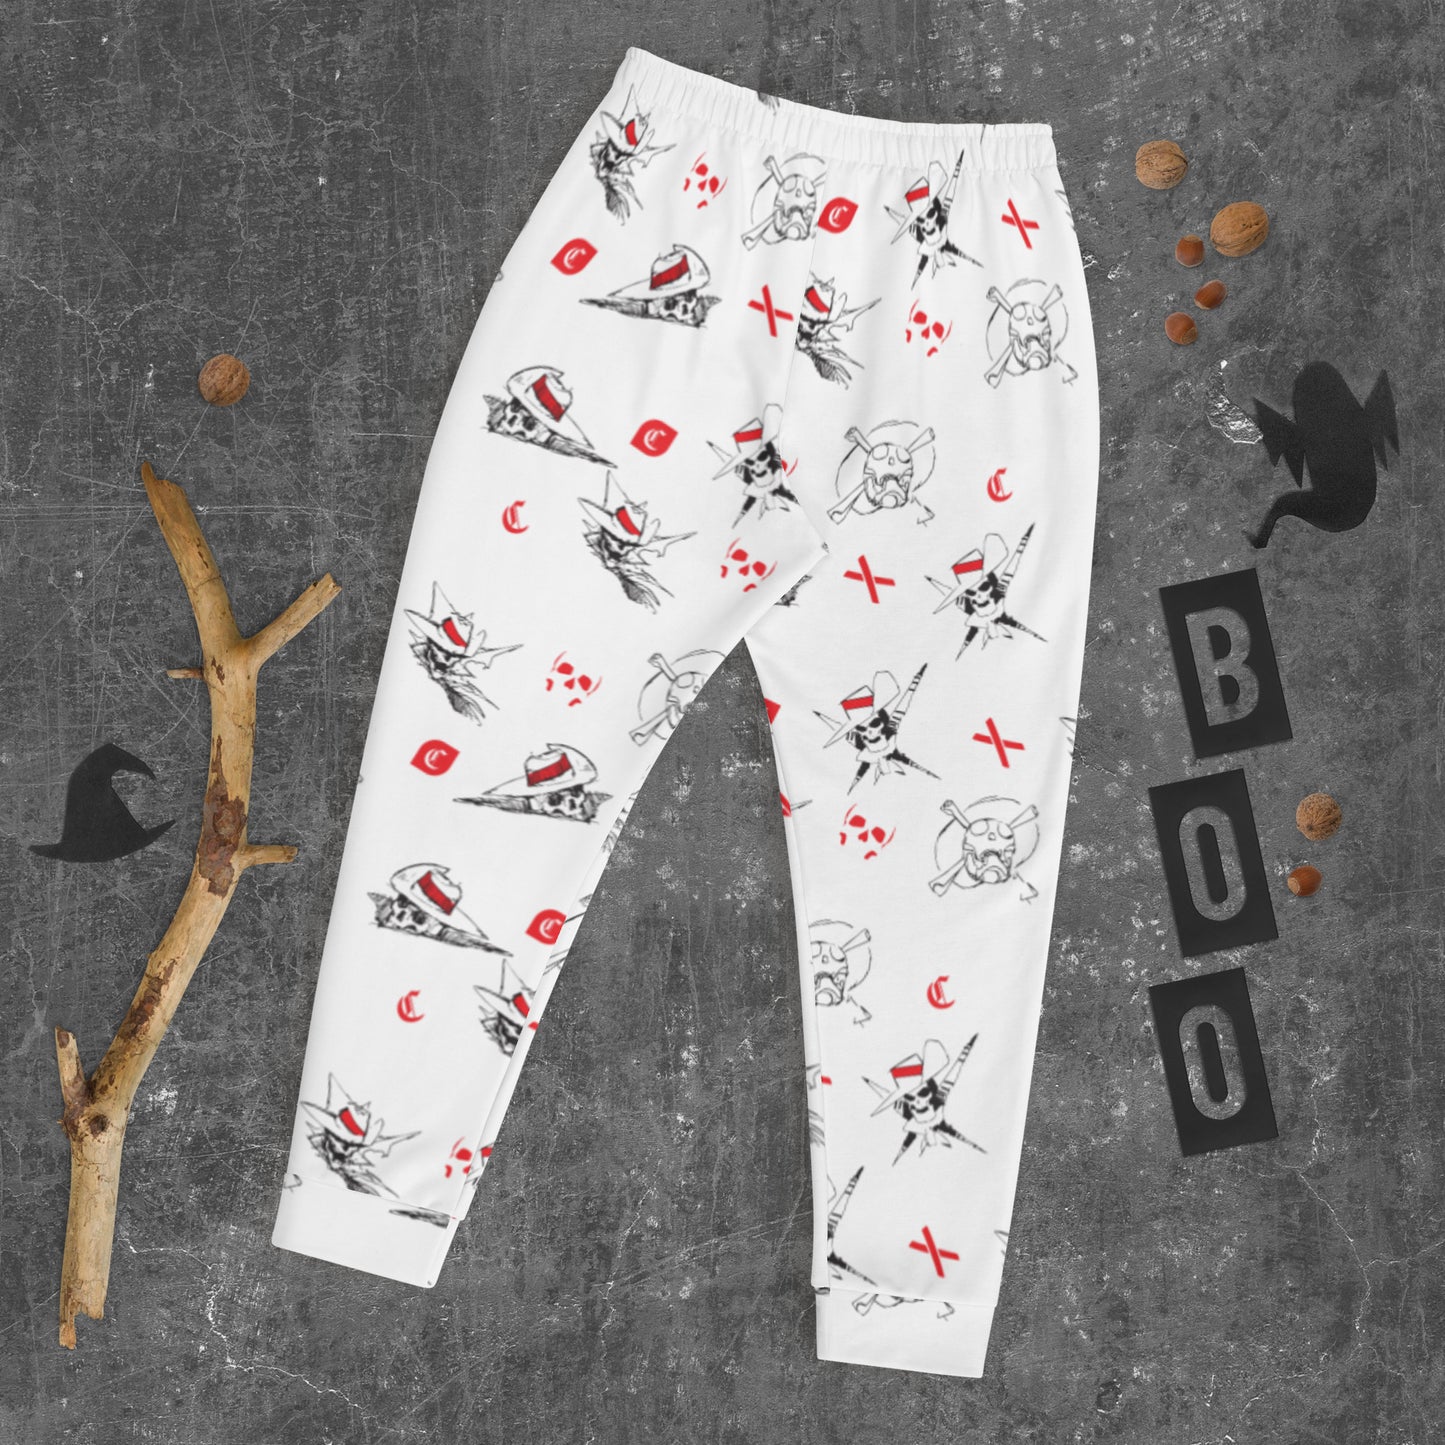 The gaudy joggers - men's